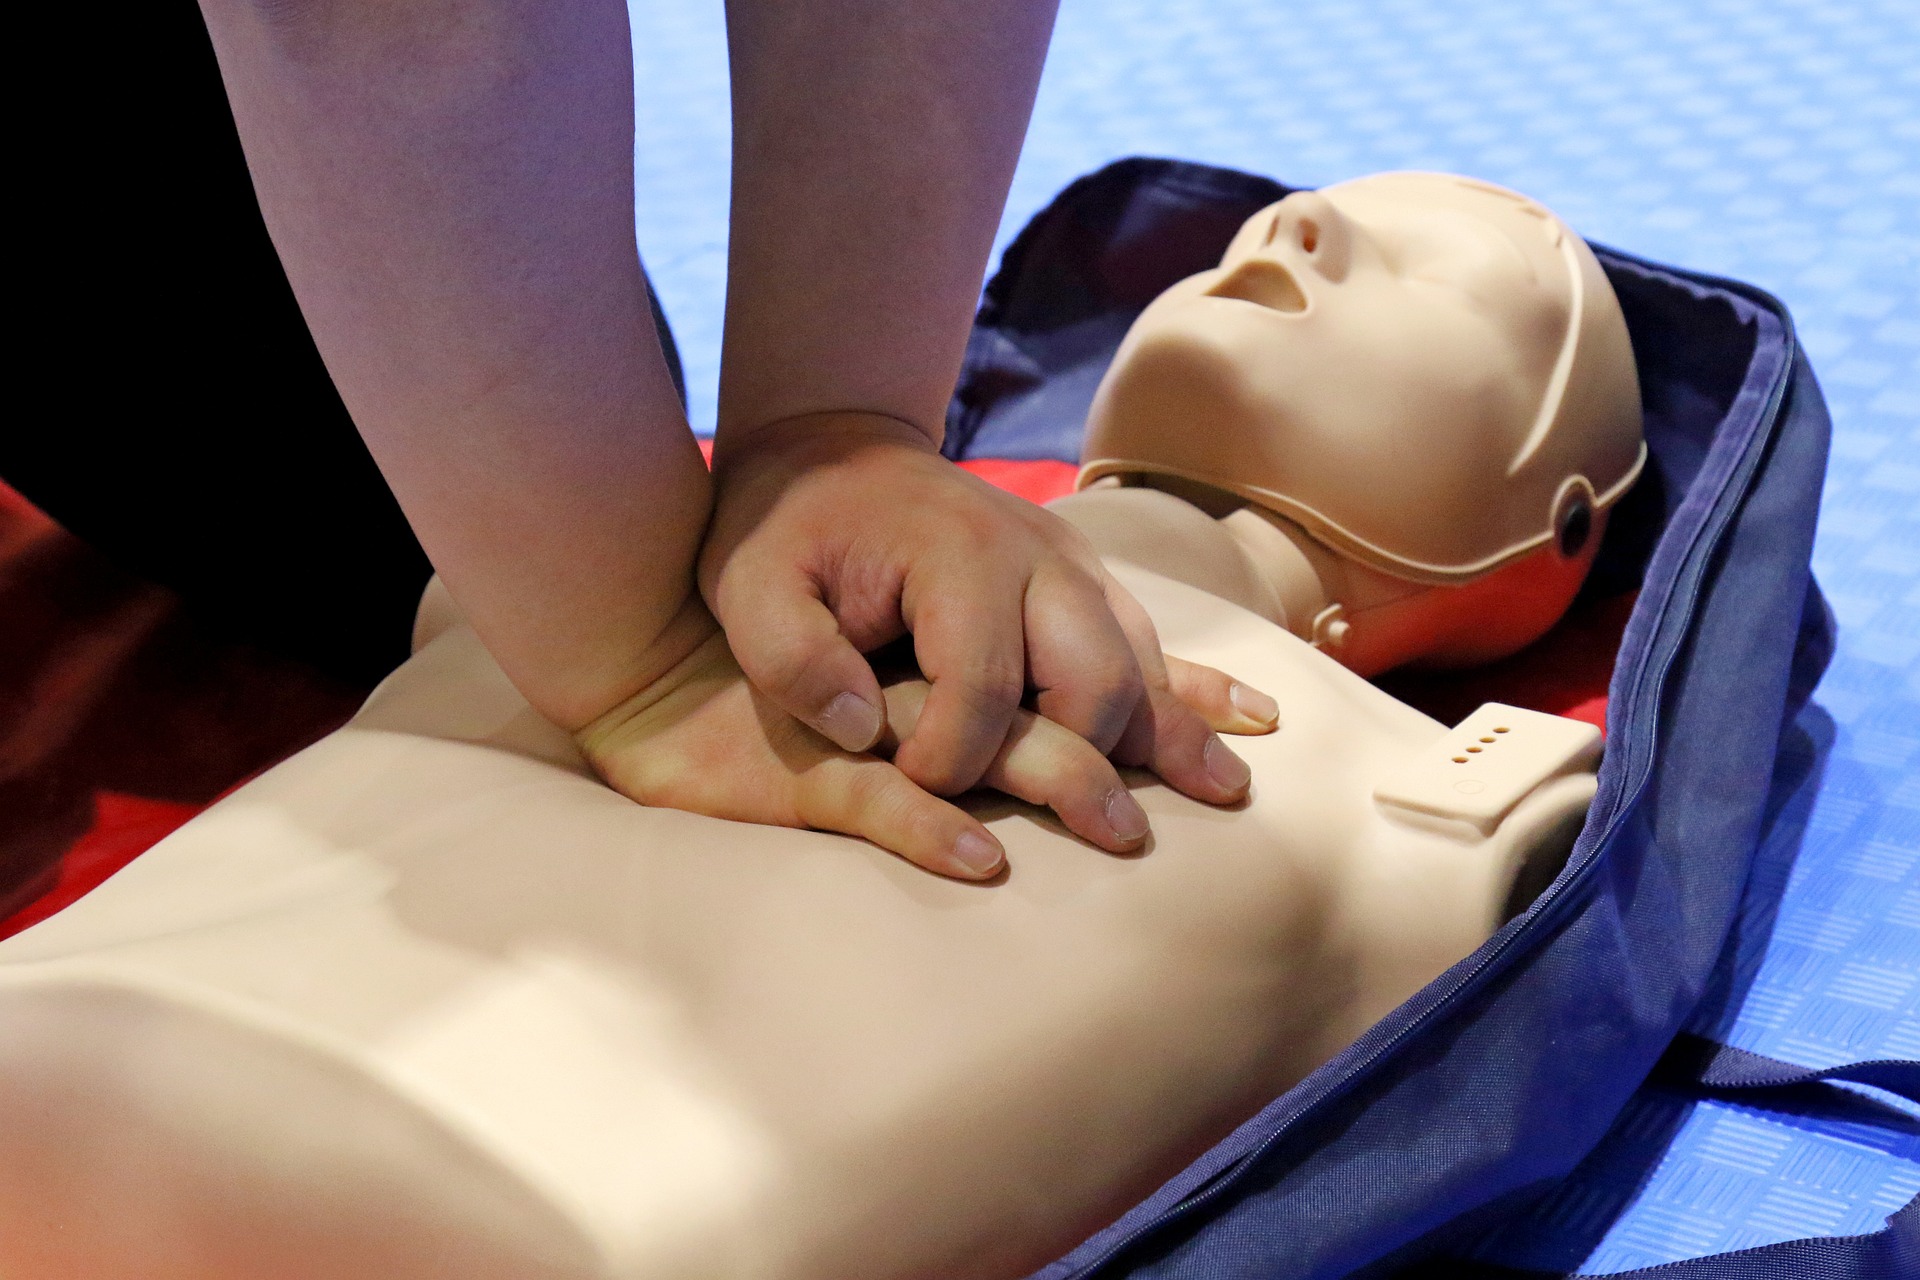 A person practices chest compressions on a CPR dummy